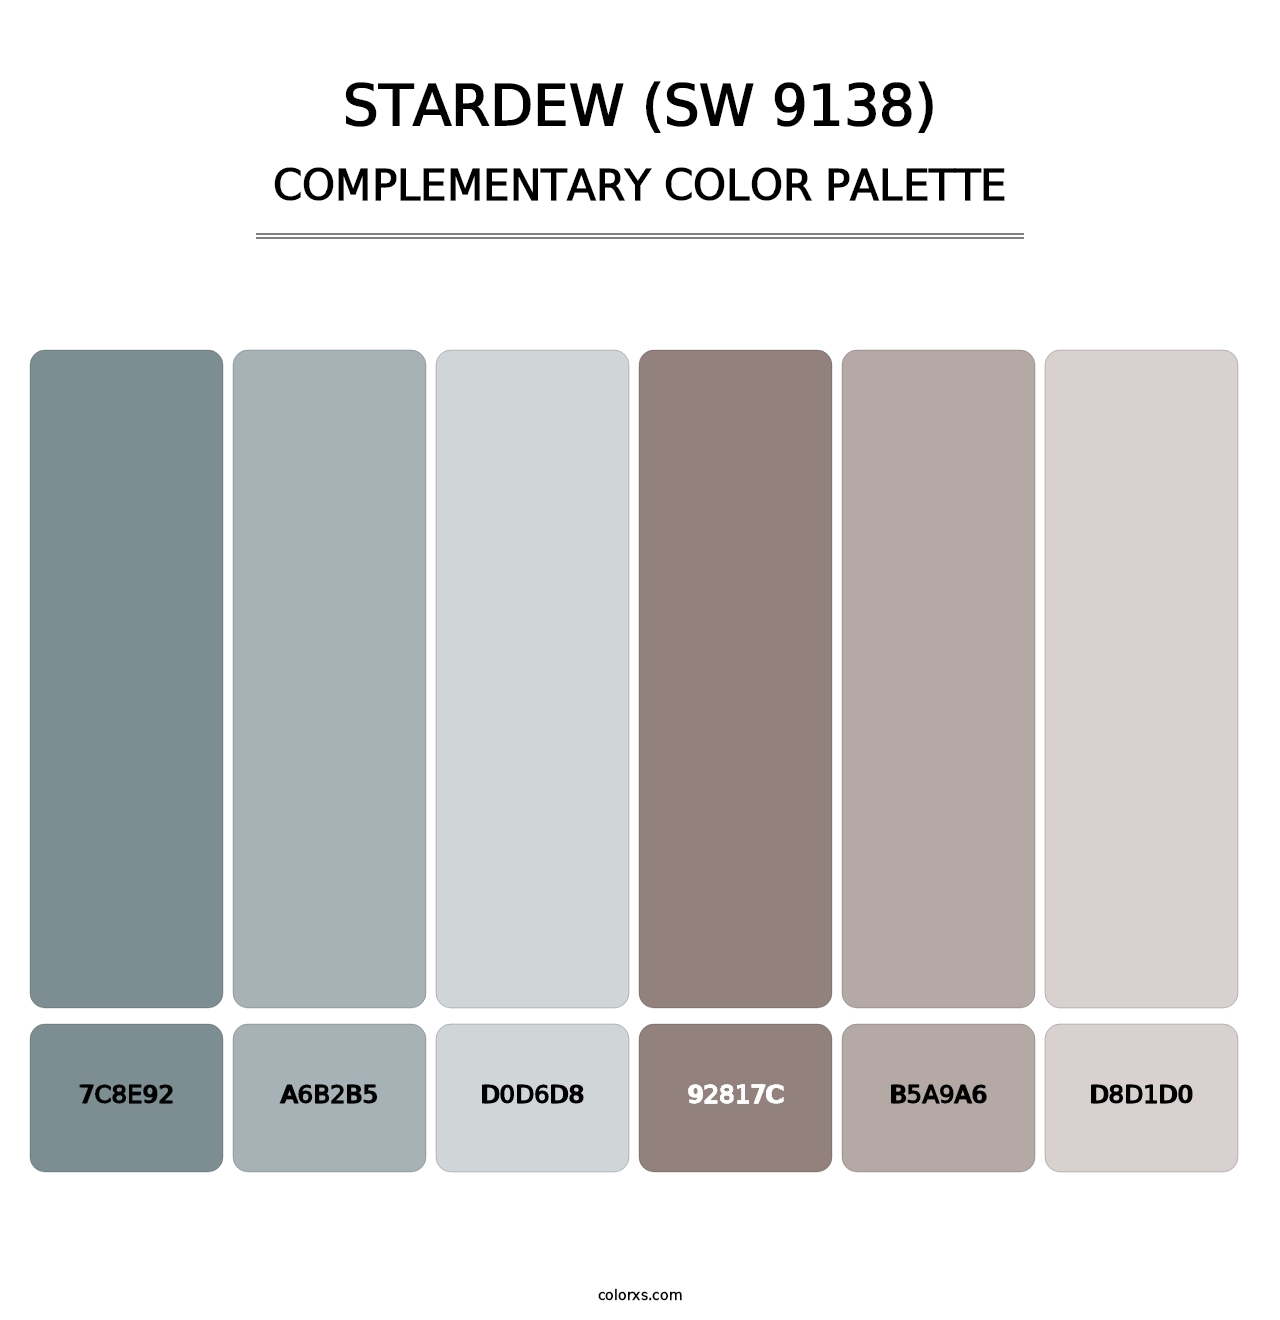 Stardew (SW 9138) - Complementary Color Palette